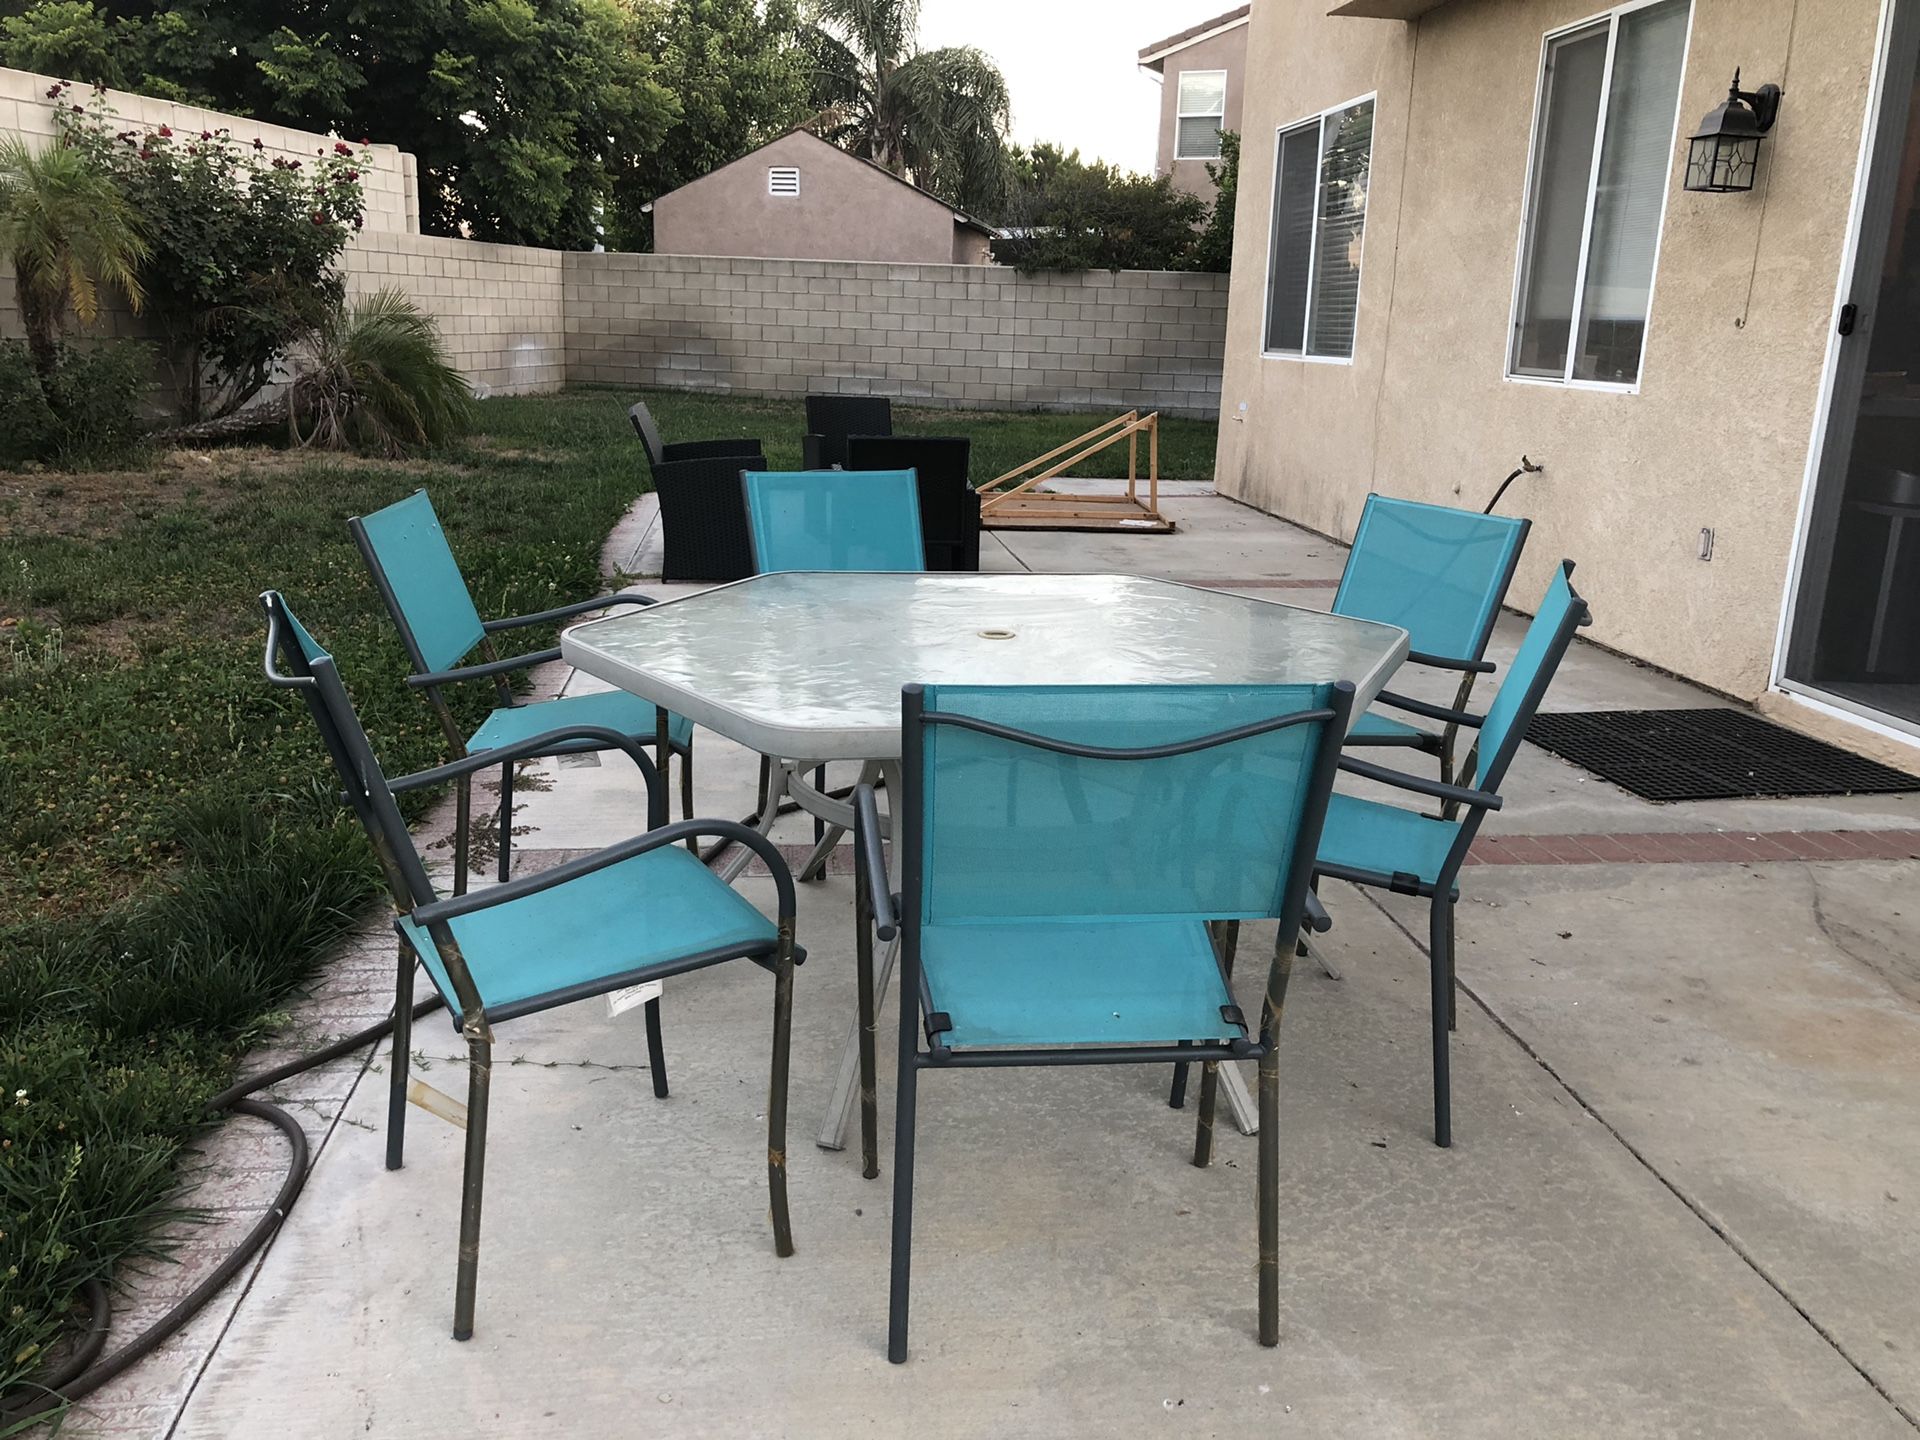 Patio Table and chairs.